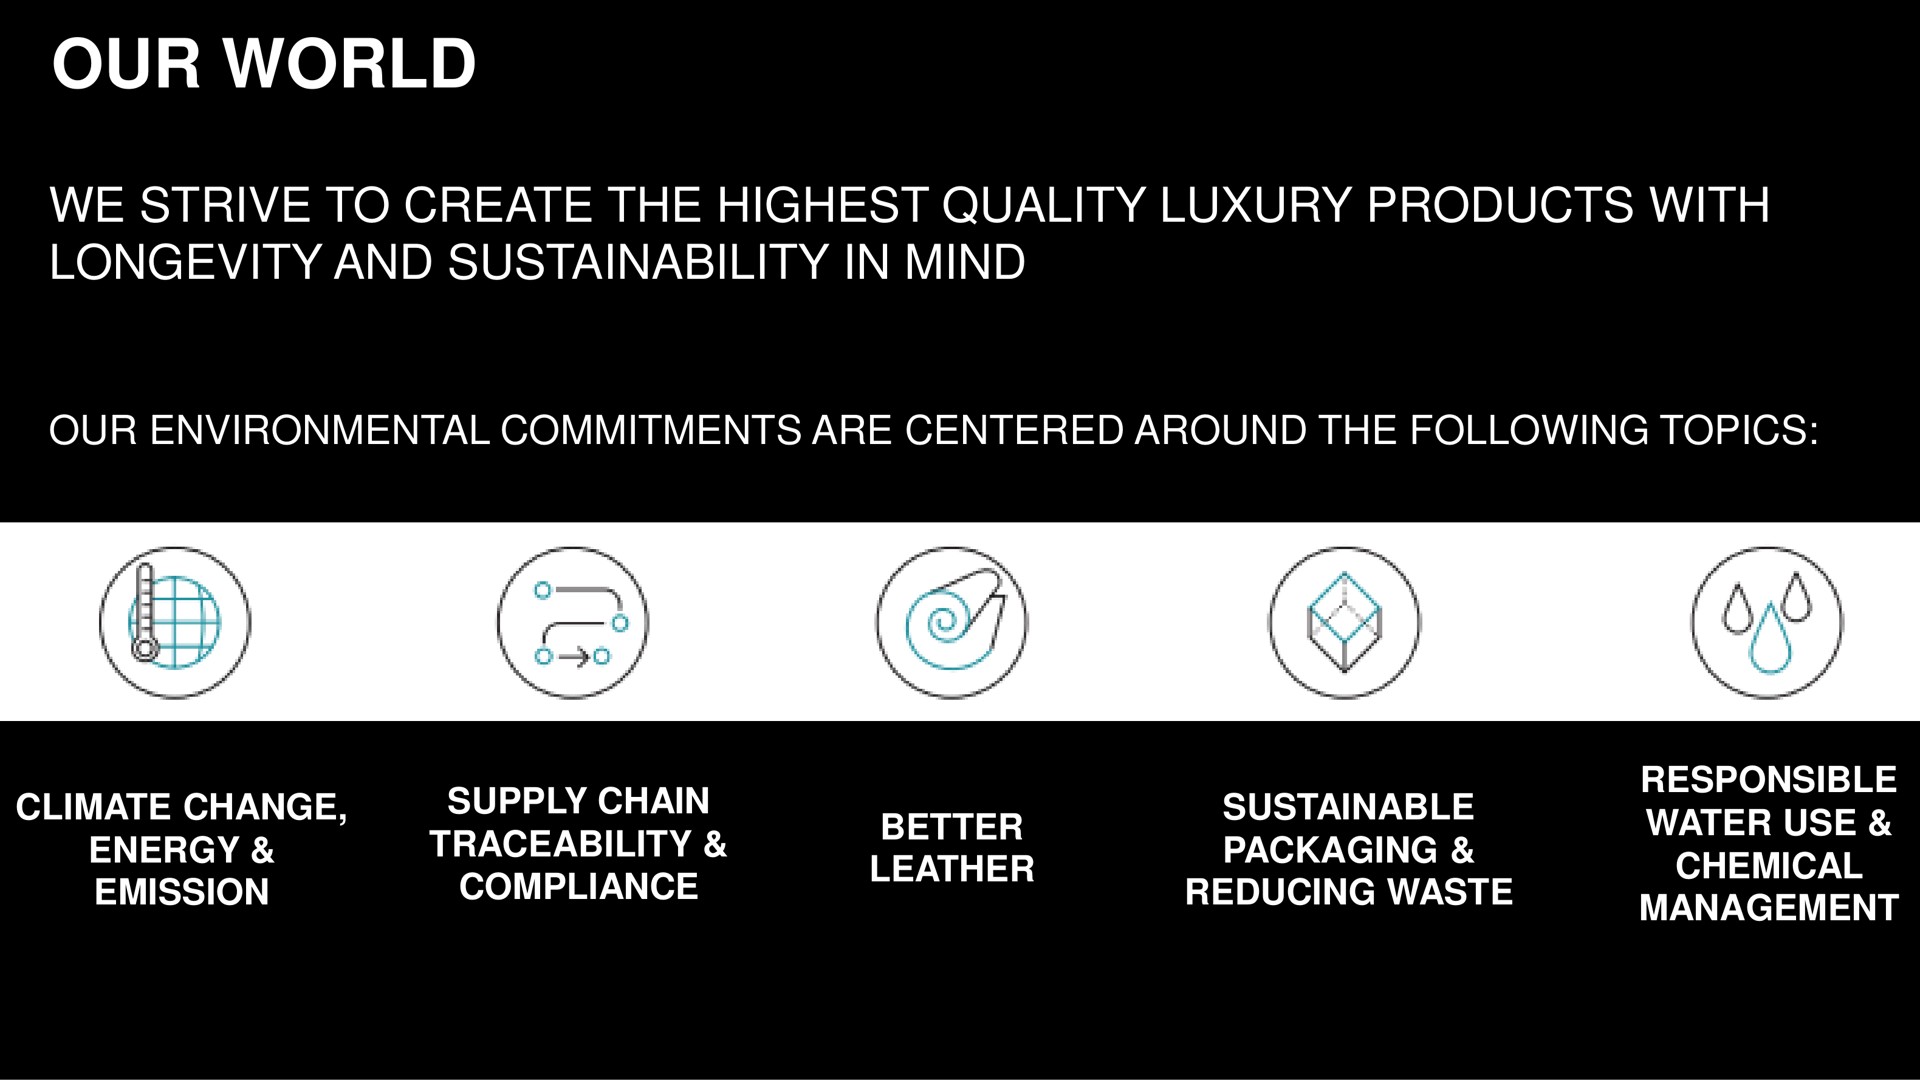 our world we strive to create the highest quality luxury products with longevity and in mind environmental commitments are centered around the following topics climate change supply chain traceability compliance energy emission sustainable packaging reducing waste responsible eat tae chemical atta | Capri Holdings